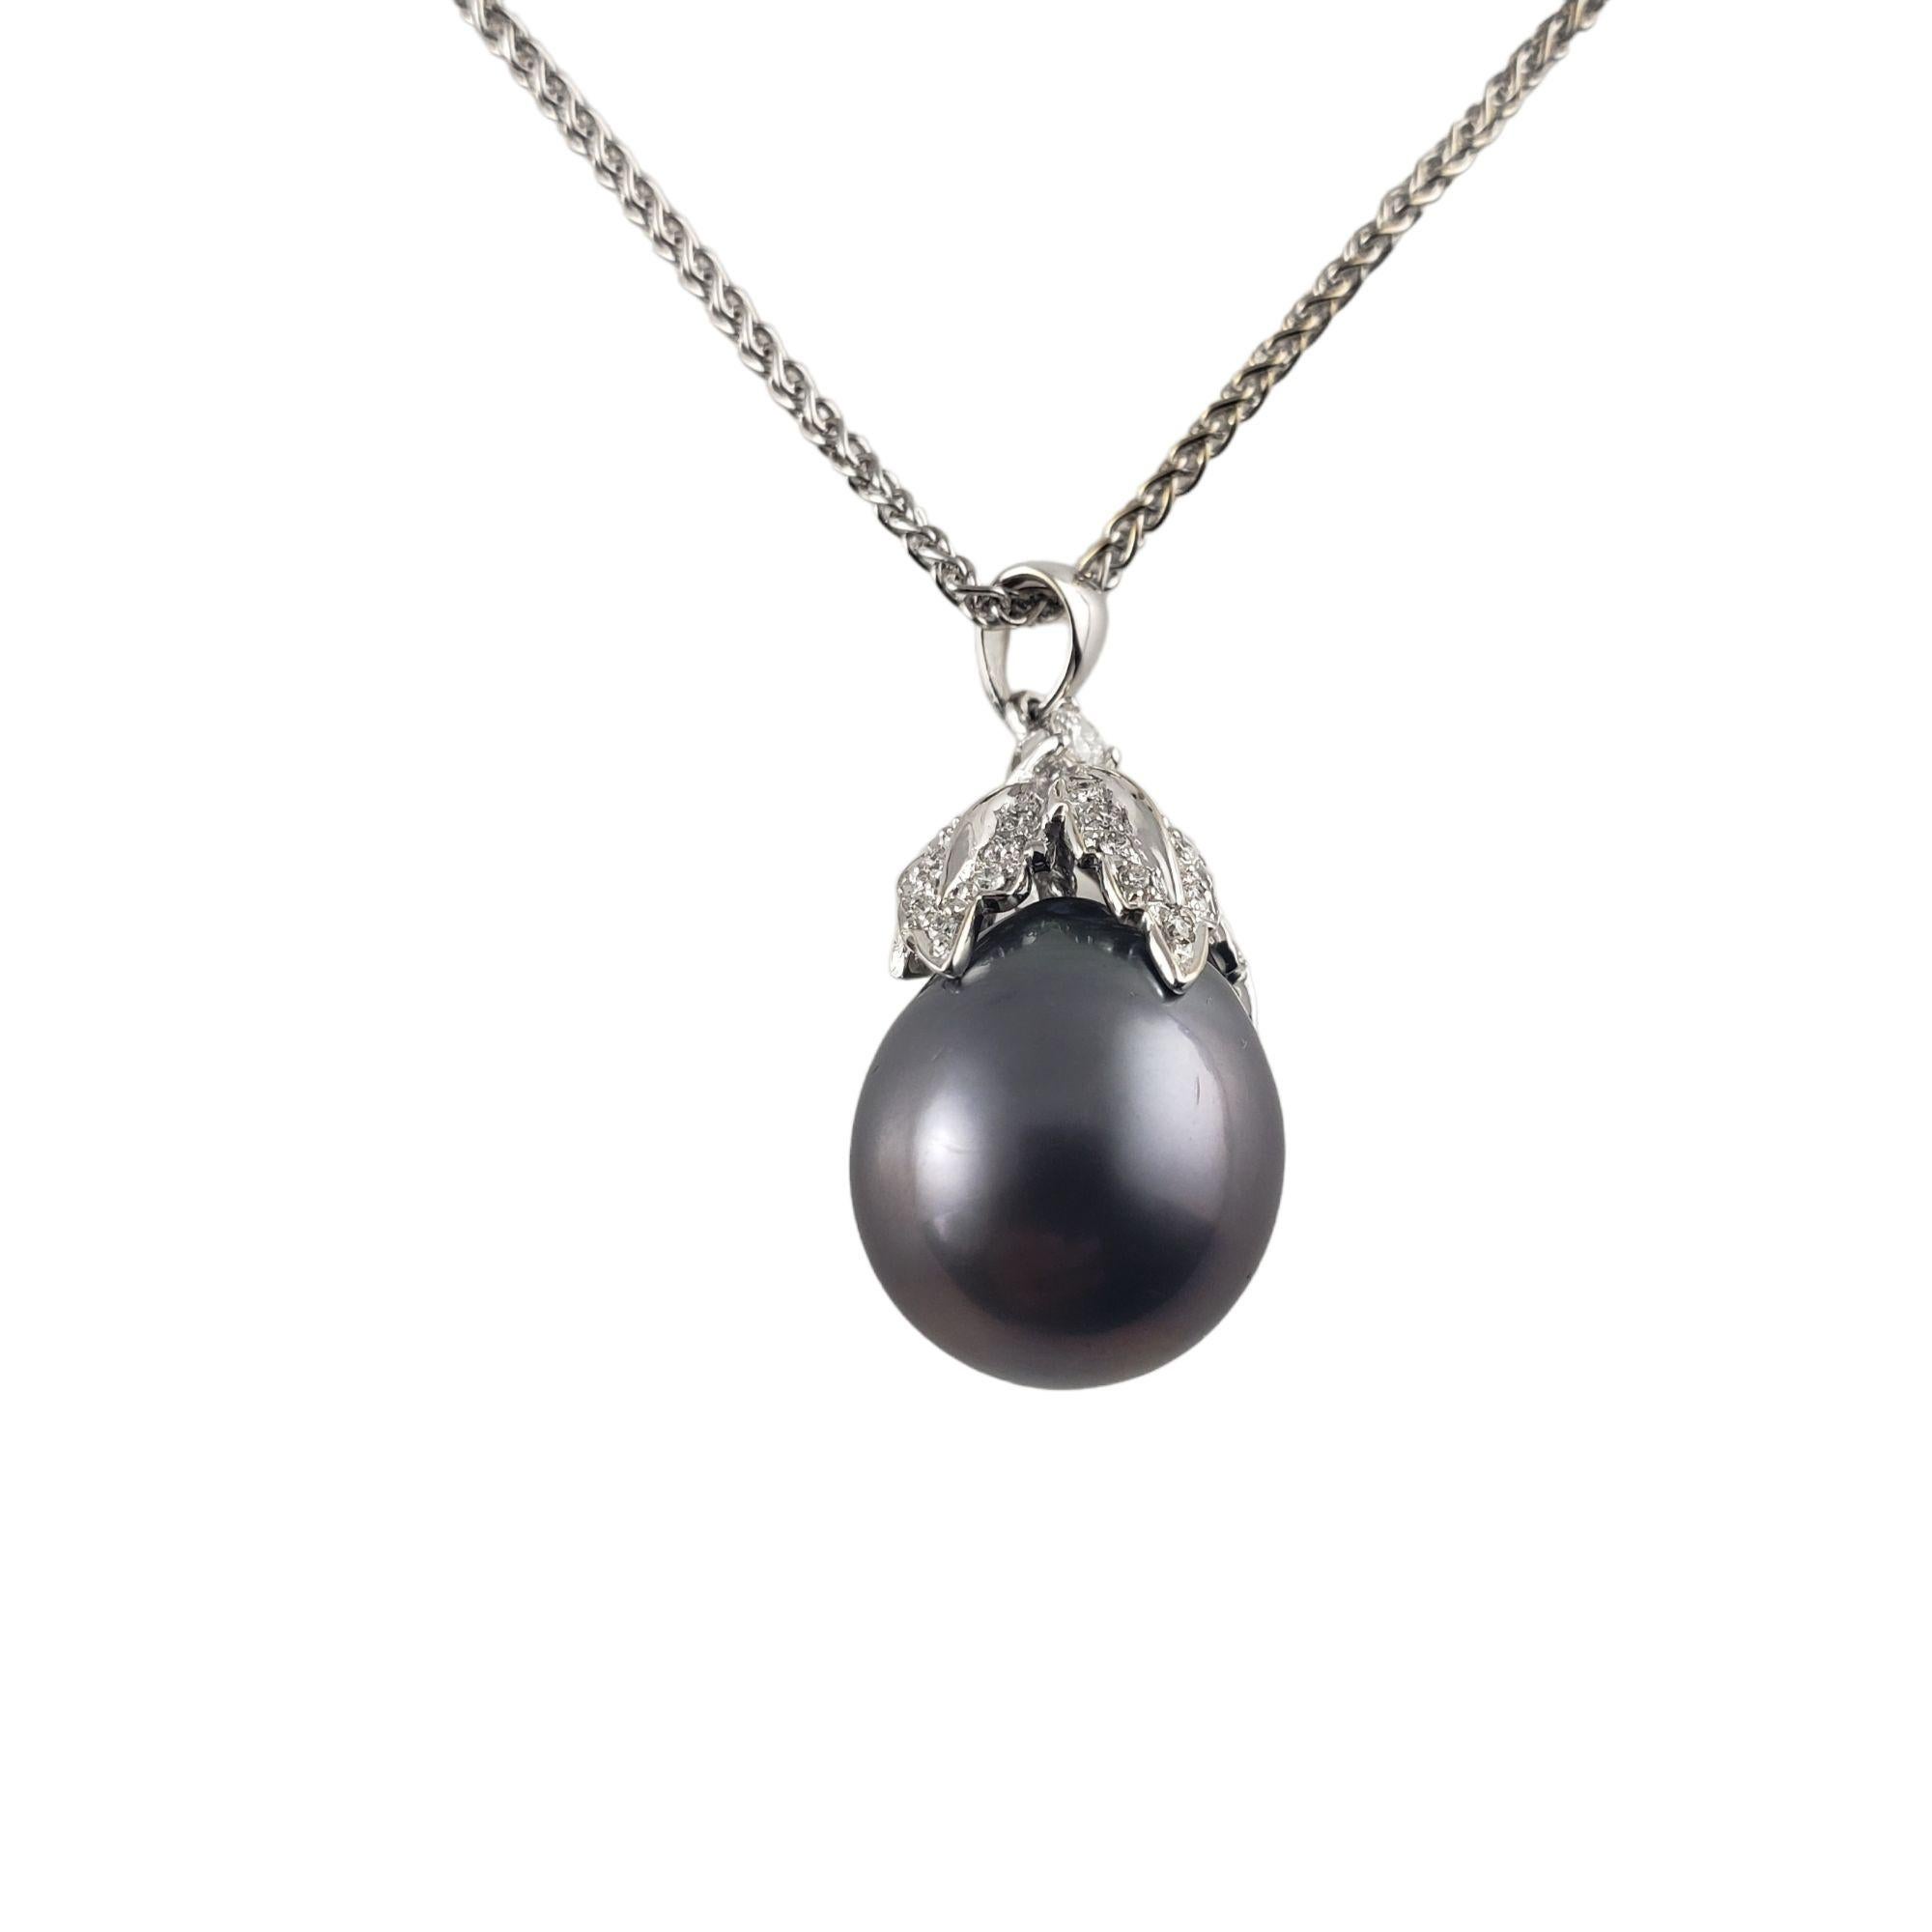 Vintage 18 Karat White Gold Tahitian Pearl and Diamond Pendant Necklace JAGi Certified-

This elegant pendant features one Tahitian pearl and 30 round brilliant cut diamonds set in classic 18K white gold. Suspends from a classic 18K white gold